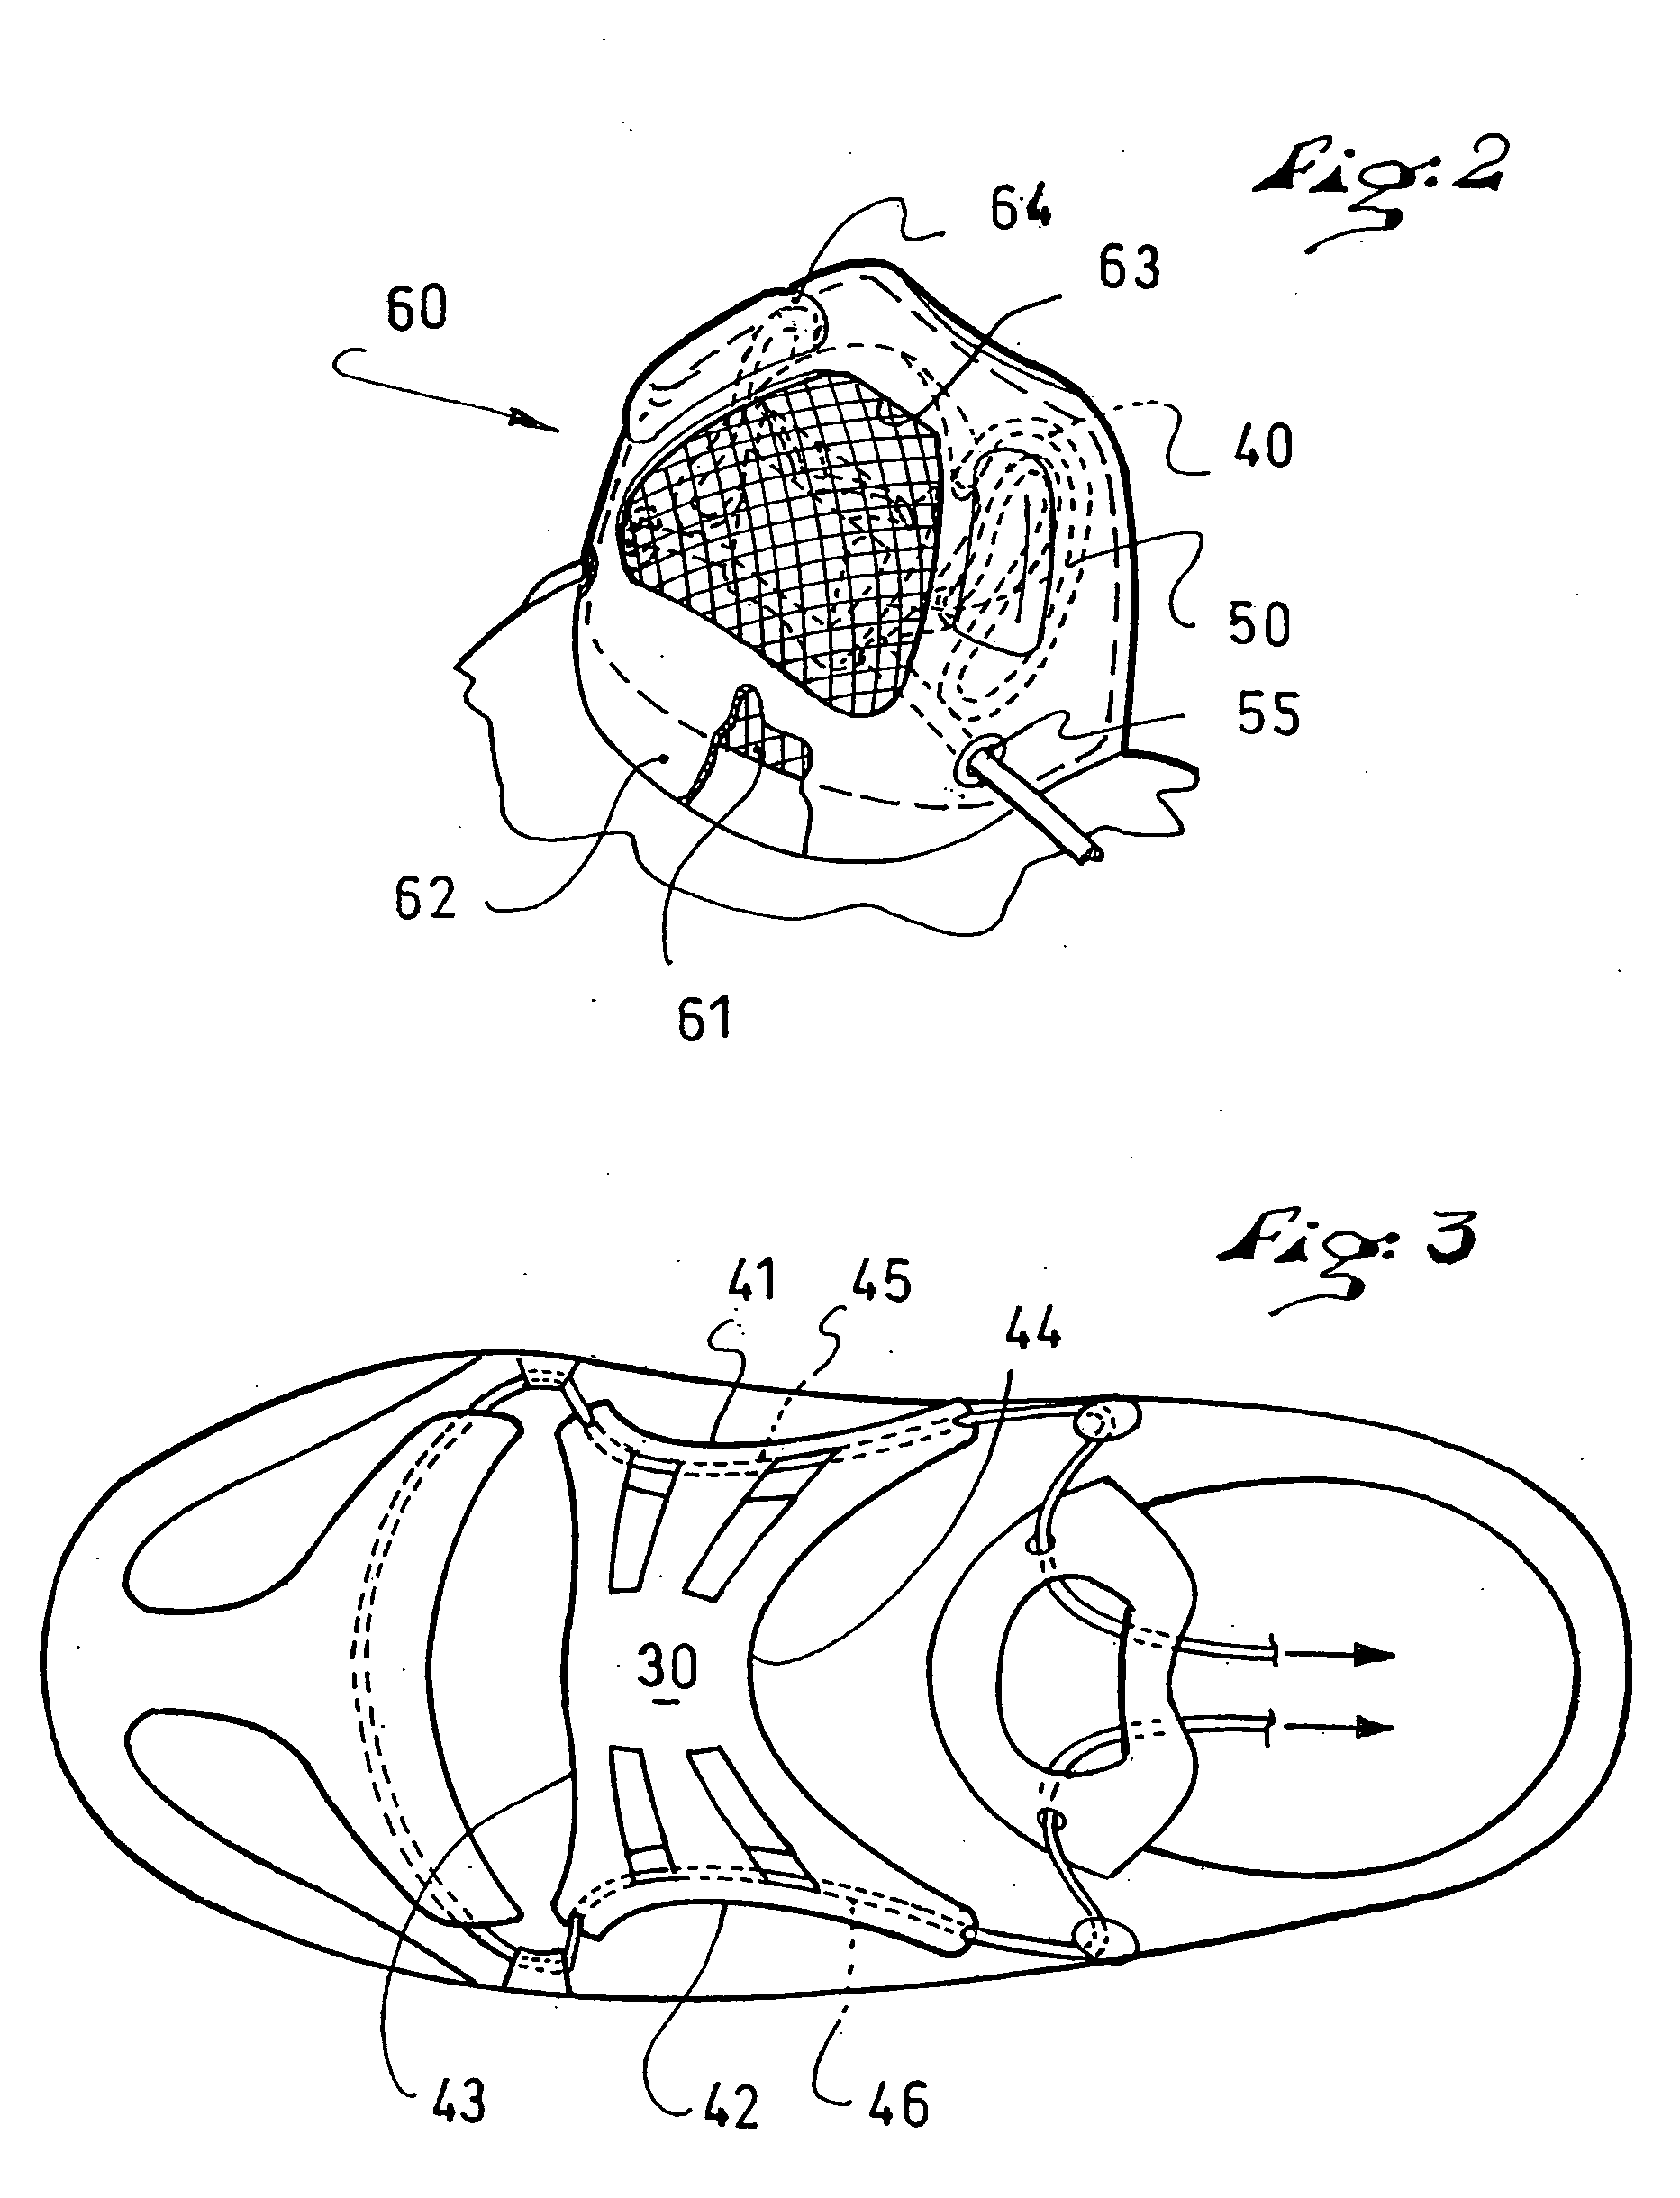 Article of footwear and lacing system therefor